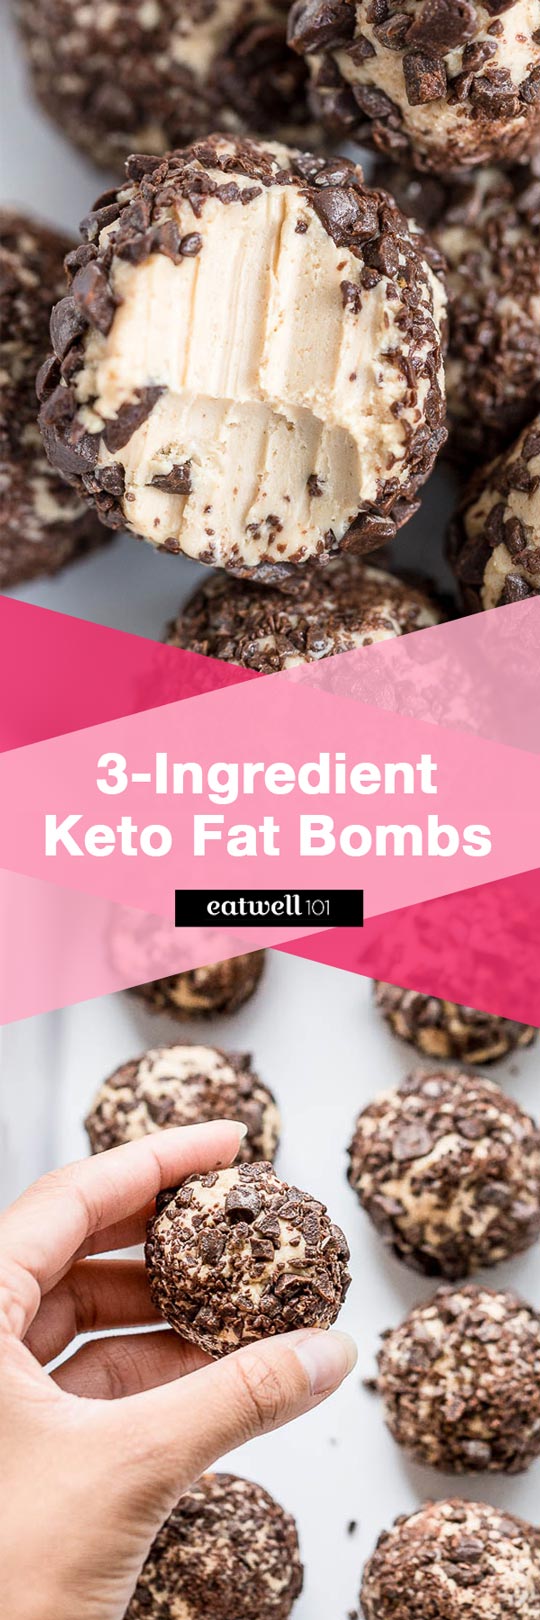 Cheesecake Keto Fat-Bombs recipe -  #eatwell101 #recipe Perfect for whenever you need something quick & #keto throughout the day. #creamcheese #Cheesecake #Keto #FatBombs 